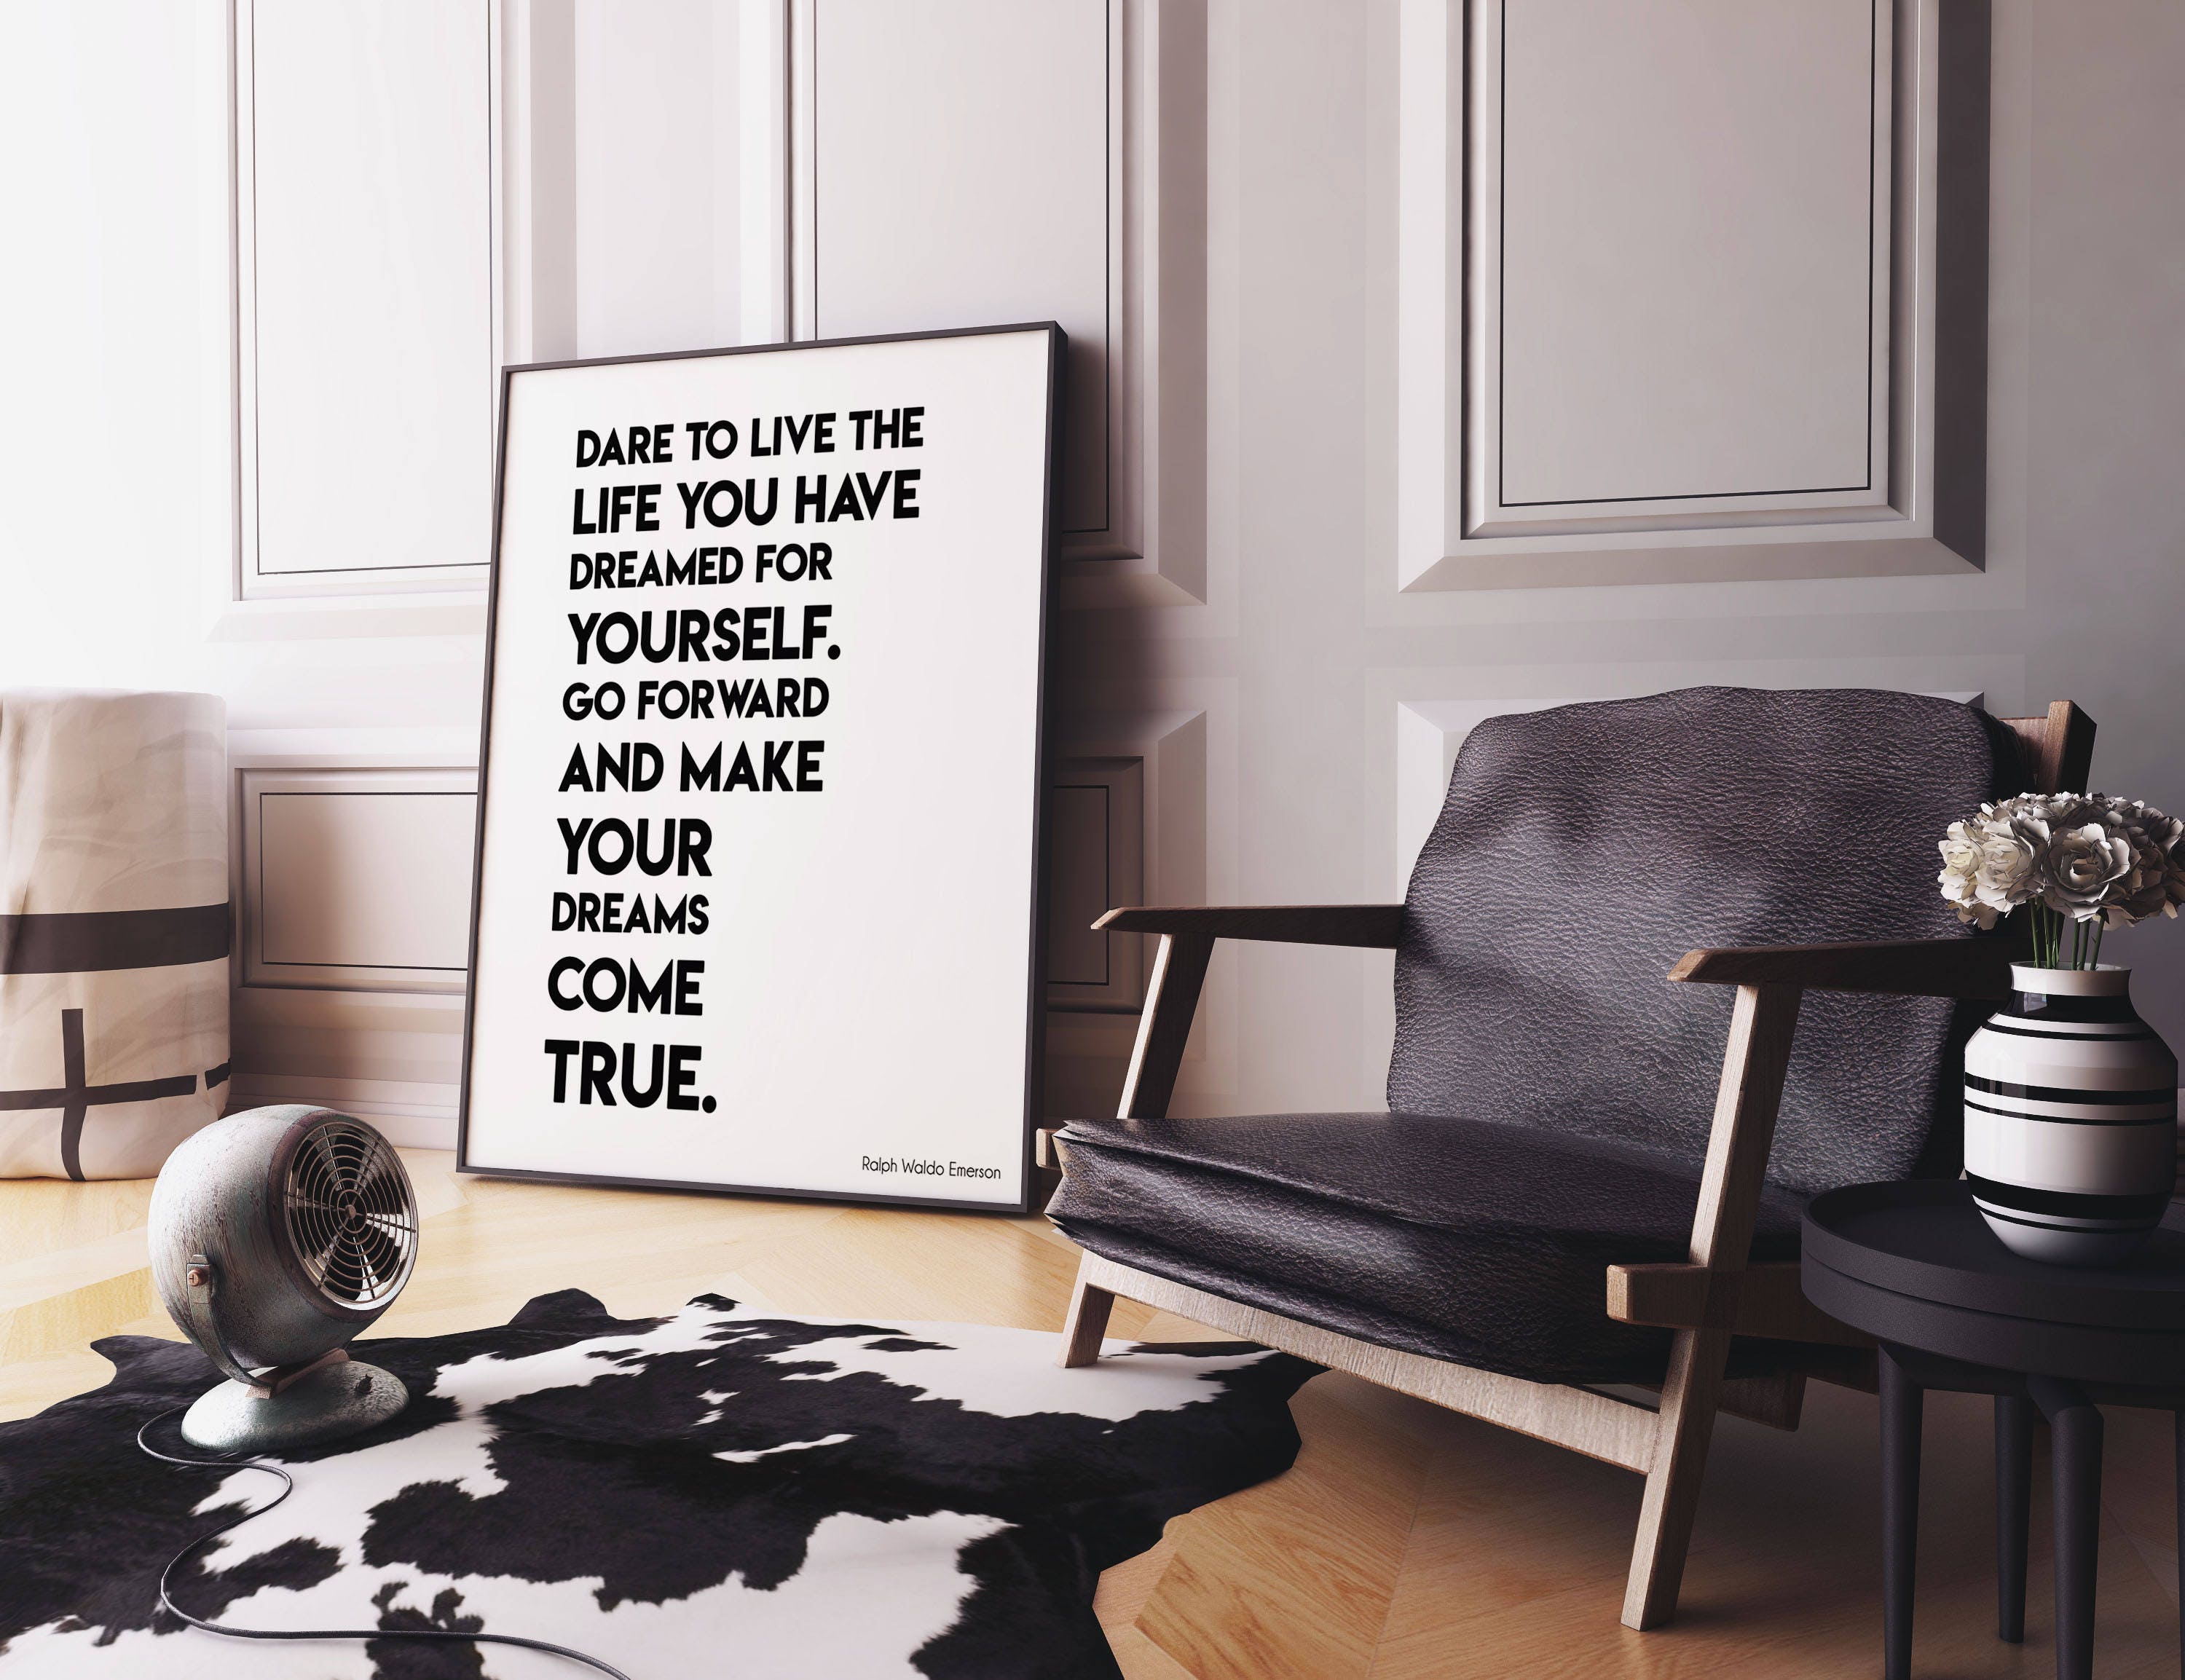 Ralph Waldo Emerson Inspirational Gift Positive Quote, Dare To Live The Life You Have Dreamed Black & White Art Inspirational Print